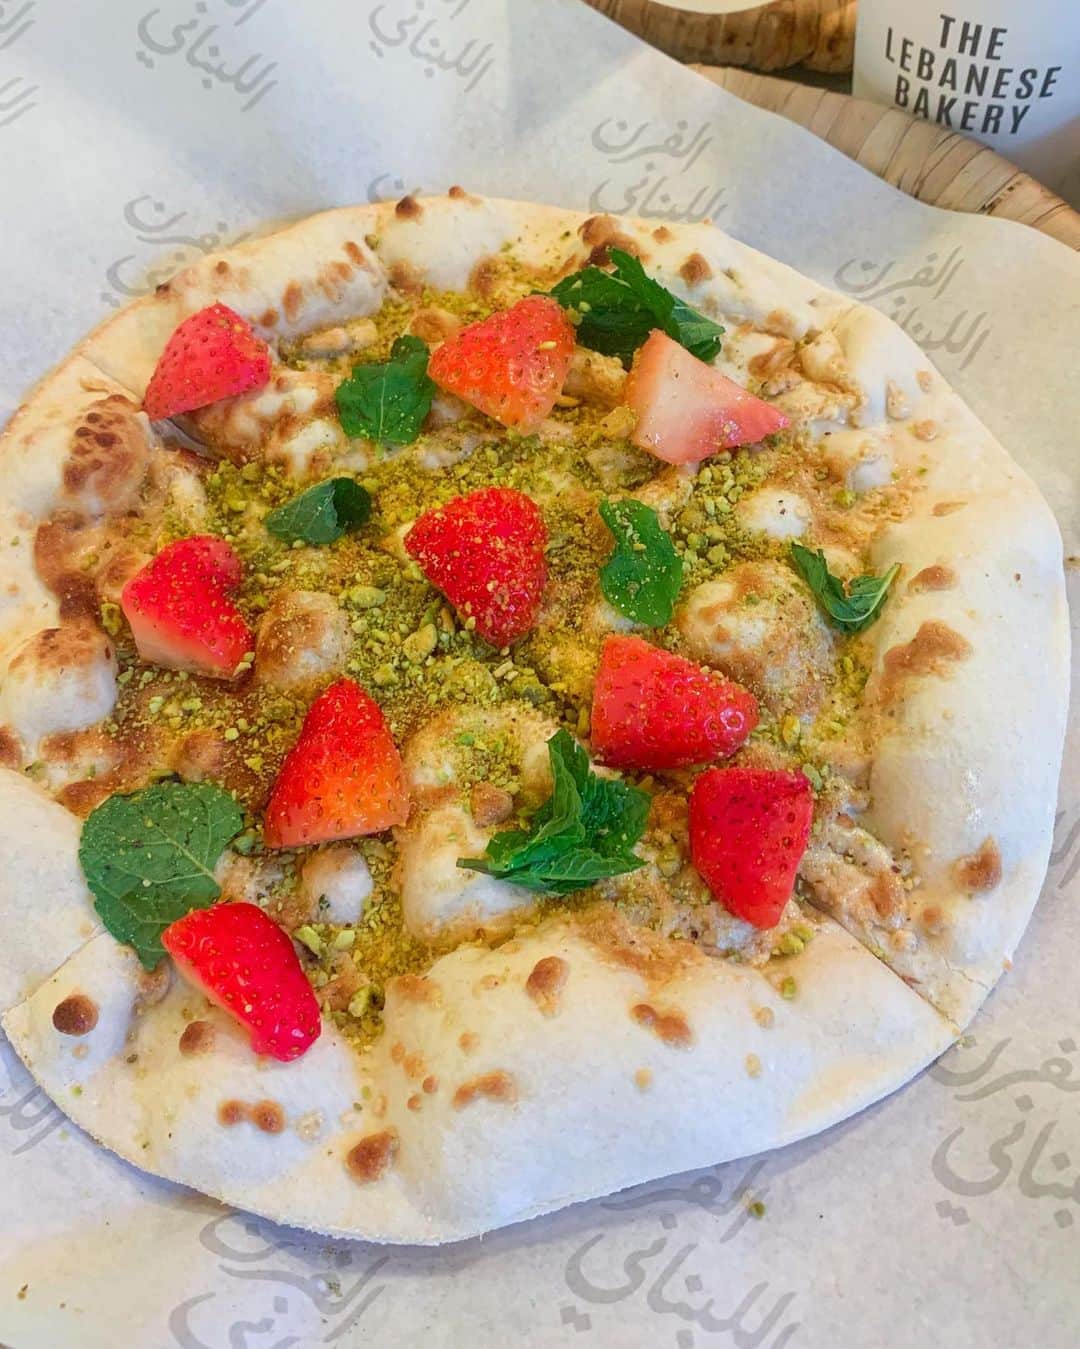 Eat With Steph & Coさんのインスタグラム写真 - (Eat With Steph & CoInstagram)「😌 My dream breakfast would be waking up to the warm, aromatic Lebanese flatbreads freshly baked at @thelebanesebakeryldn , topped with spice roasted peppers, creamy goat cheese, toasted pine nuts and much much more... ❤️⠀ ⠀ Super gutted about all the eateries closing in London this week, but if you can make a dash before Thursday I’d definitely recommend grabbing a bite here! ✨⠀ Otherwise, you can still order this scrumptious feast to takeaway from Thursday onwards, or get delivery via @deliveroo . And at the price of £6, I definitely can’t wait to eat here again! 😋#invite⠀ ⠀ 📸: @rain.sprout⠀ ⠀ 📍 Location: Covent Garden, Harrods ⠀ 💰 Price: £5-10pp⠀ 👨‍🍳 Cuisine: Lebanese⠀ ❤️ Best for: Baked goods⠀ ☎️ Book ahead: Optional⠀ 🌱 Veg options: Yes⠀ 🍽 Top dishes: ⠀  - Muhammara & Labneh⠀  - Ras Asfour⠀  - Sahlab (drink)⠀ ⠀ ⠀ ⠀ ⠀ ⠀ #foodstagram #eeeeeats #forkyeah #londonfood #timeoutlondon #londonrestaurants #toplondonrestaurant #eatlondon #infatuationlondon #foodenvy #takeaway⠀ #lebanesebakeryldn #lebanesebakery #thelebanesebakery #lebaneseflatbread #lebanesecuisine #lebanoneats #lebanese #mediterraneanfood #freshlybaked #lebanesepastry #pomegranate #manousheh #manoush #manakeesh #muhammara #labneh #sahlab」11月3日 17時14分 - eatwithsteph_ldn